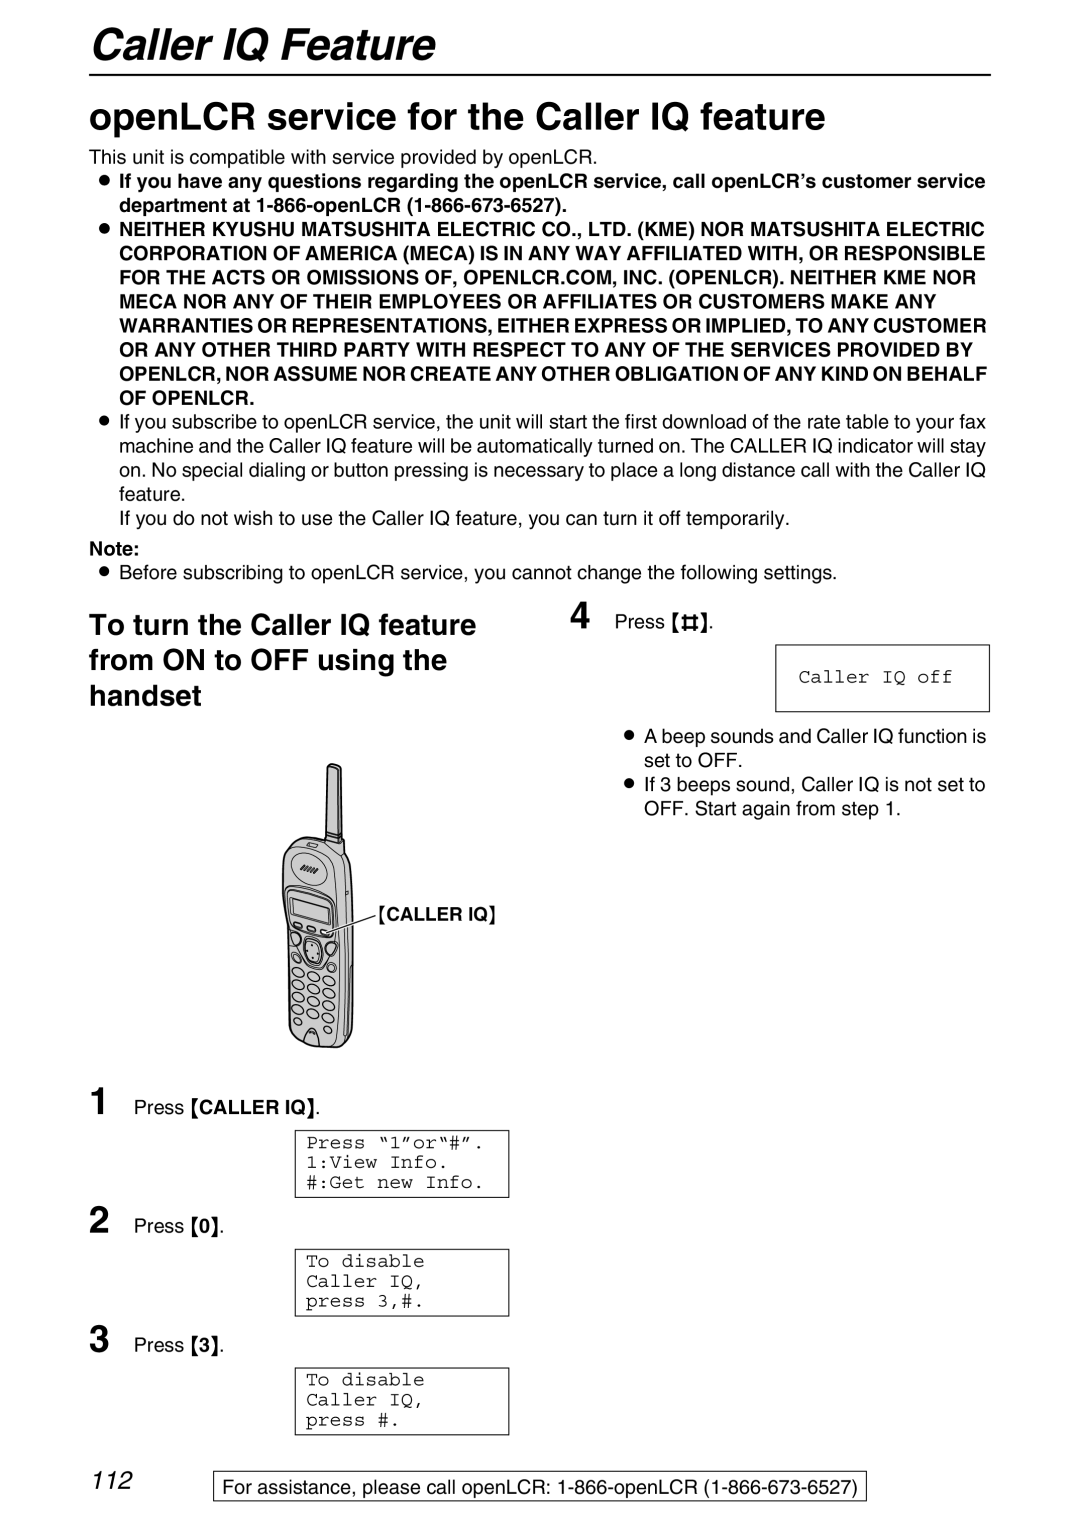 Panasonic KX-FPG371 manual Caller IQ Feature, OpenLCR service for the Caller IQ feature, To turn the Caller IQ feature 